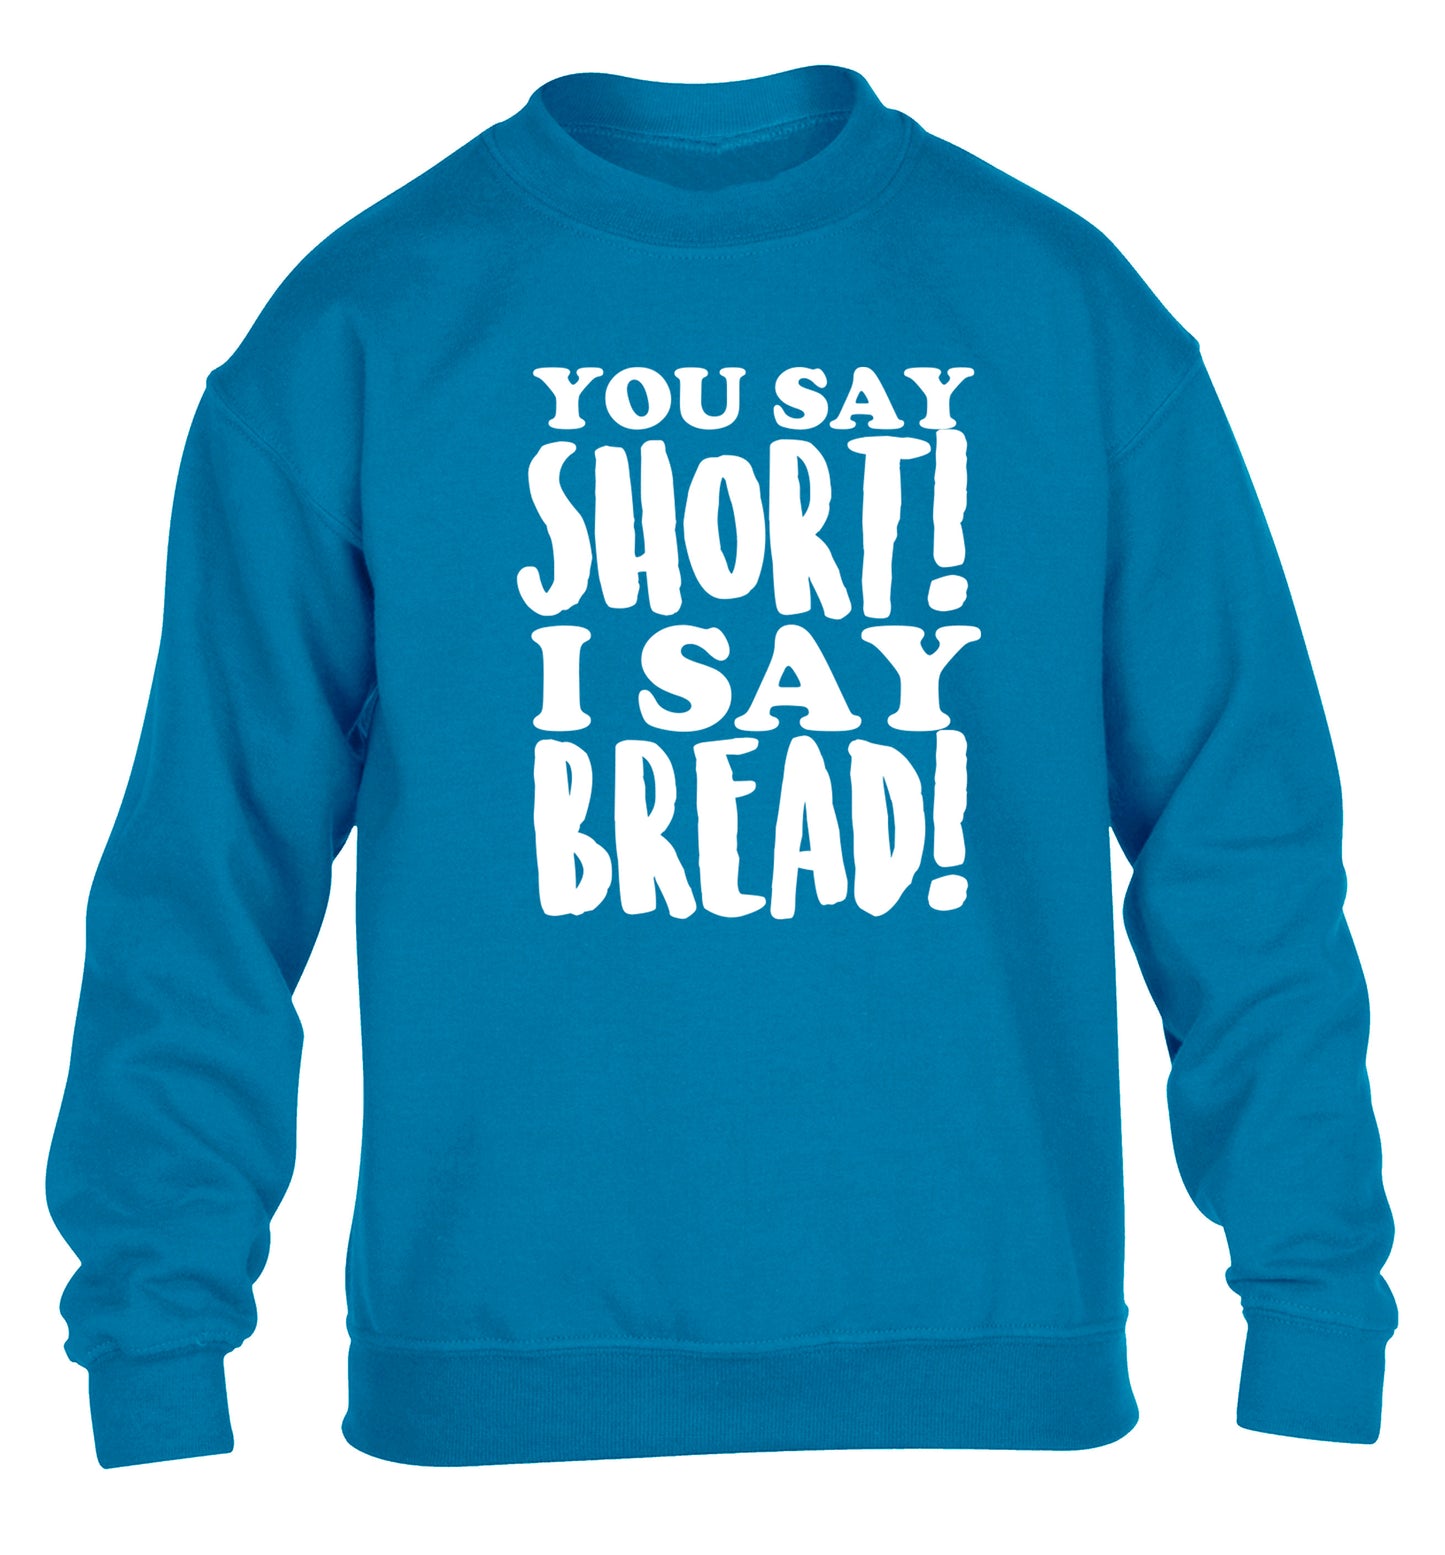 You say short I say bread! children's blue sweater 12-14 Years